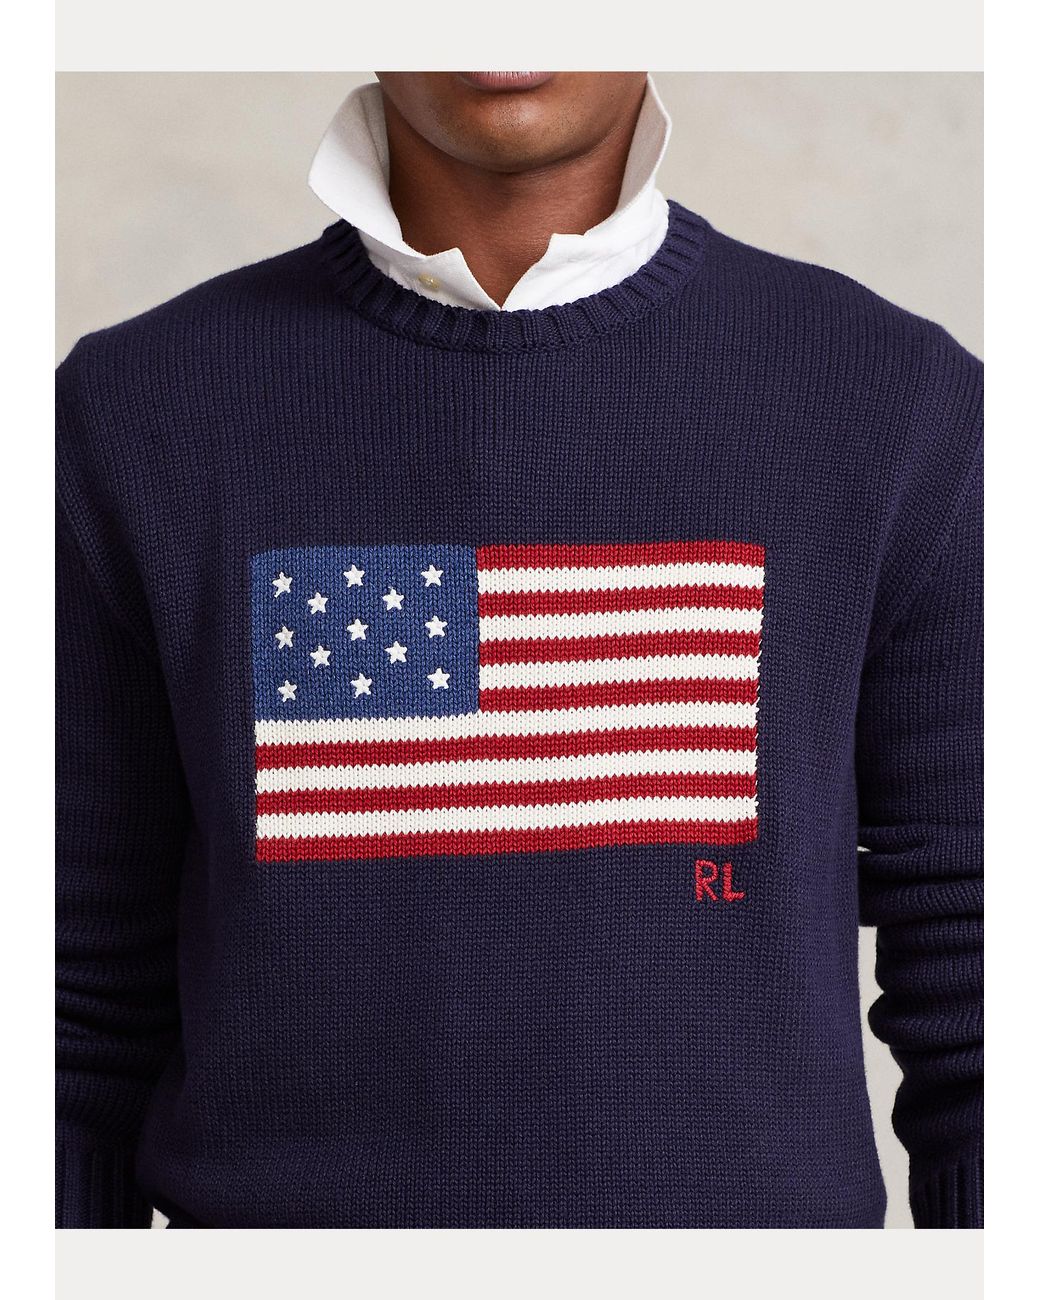 Polo Ralph Lauren Cotton Ralph Lauren The Iconic Flag Sweater in Navy  (Blue) for Men - Save 75% | Lyst UK